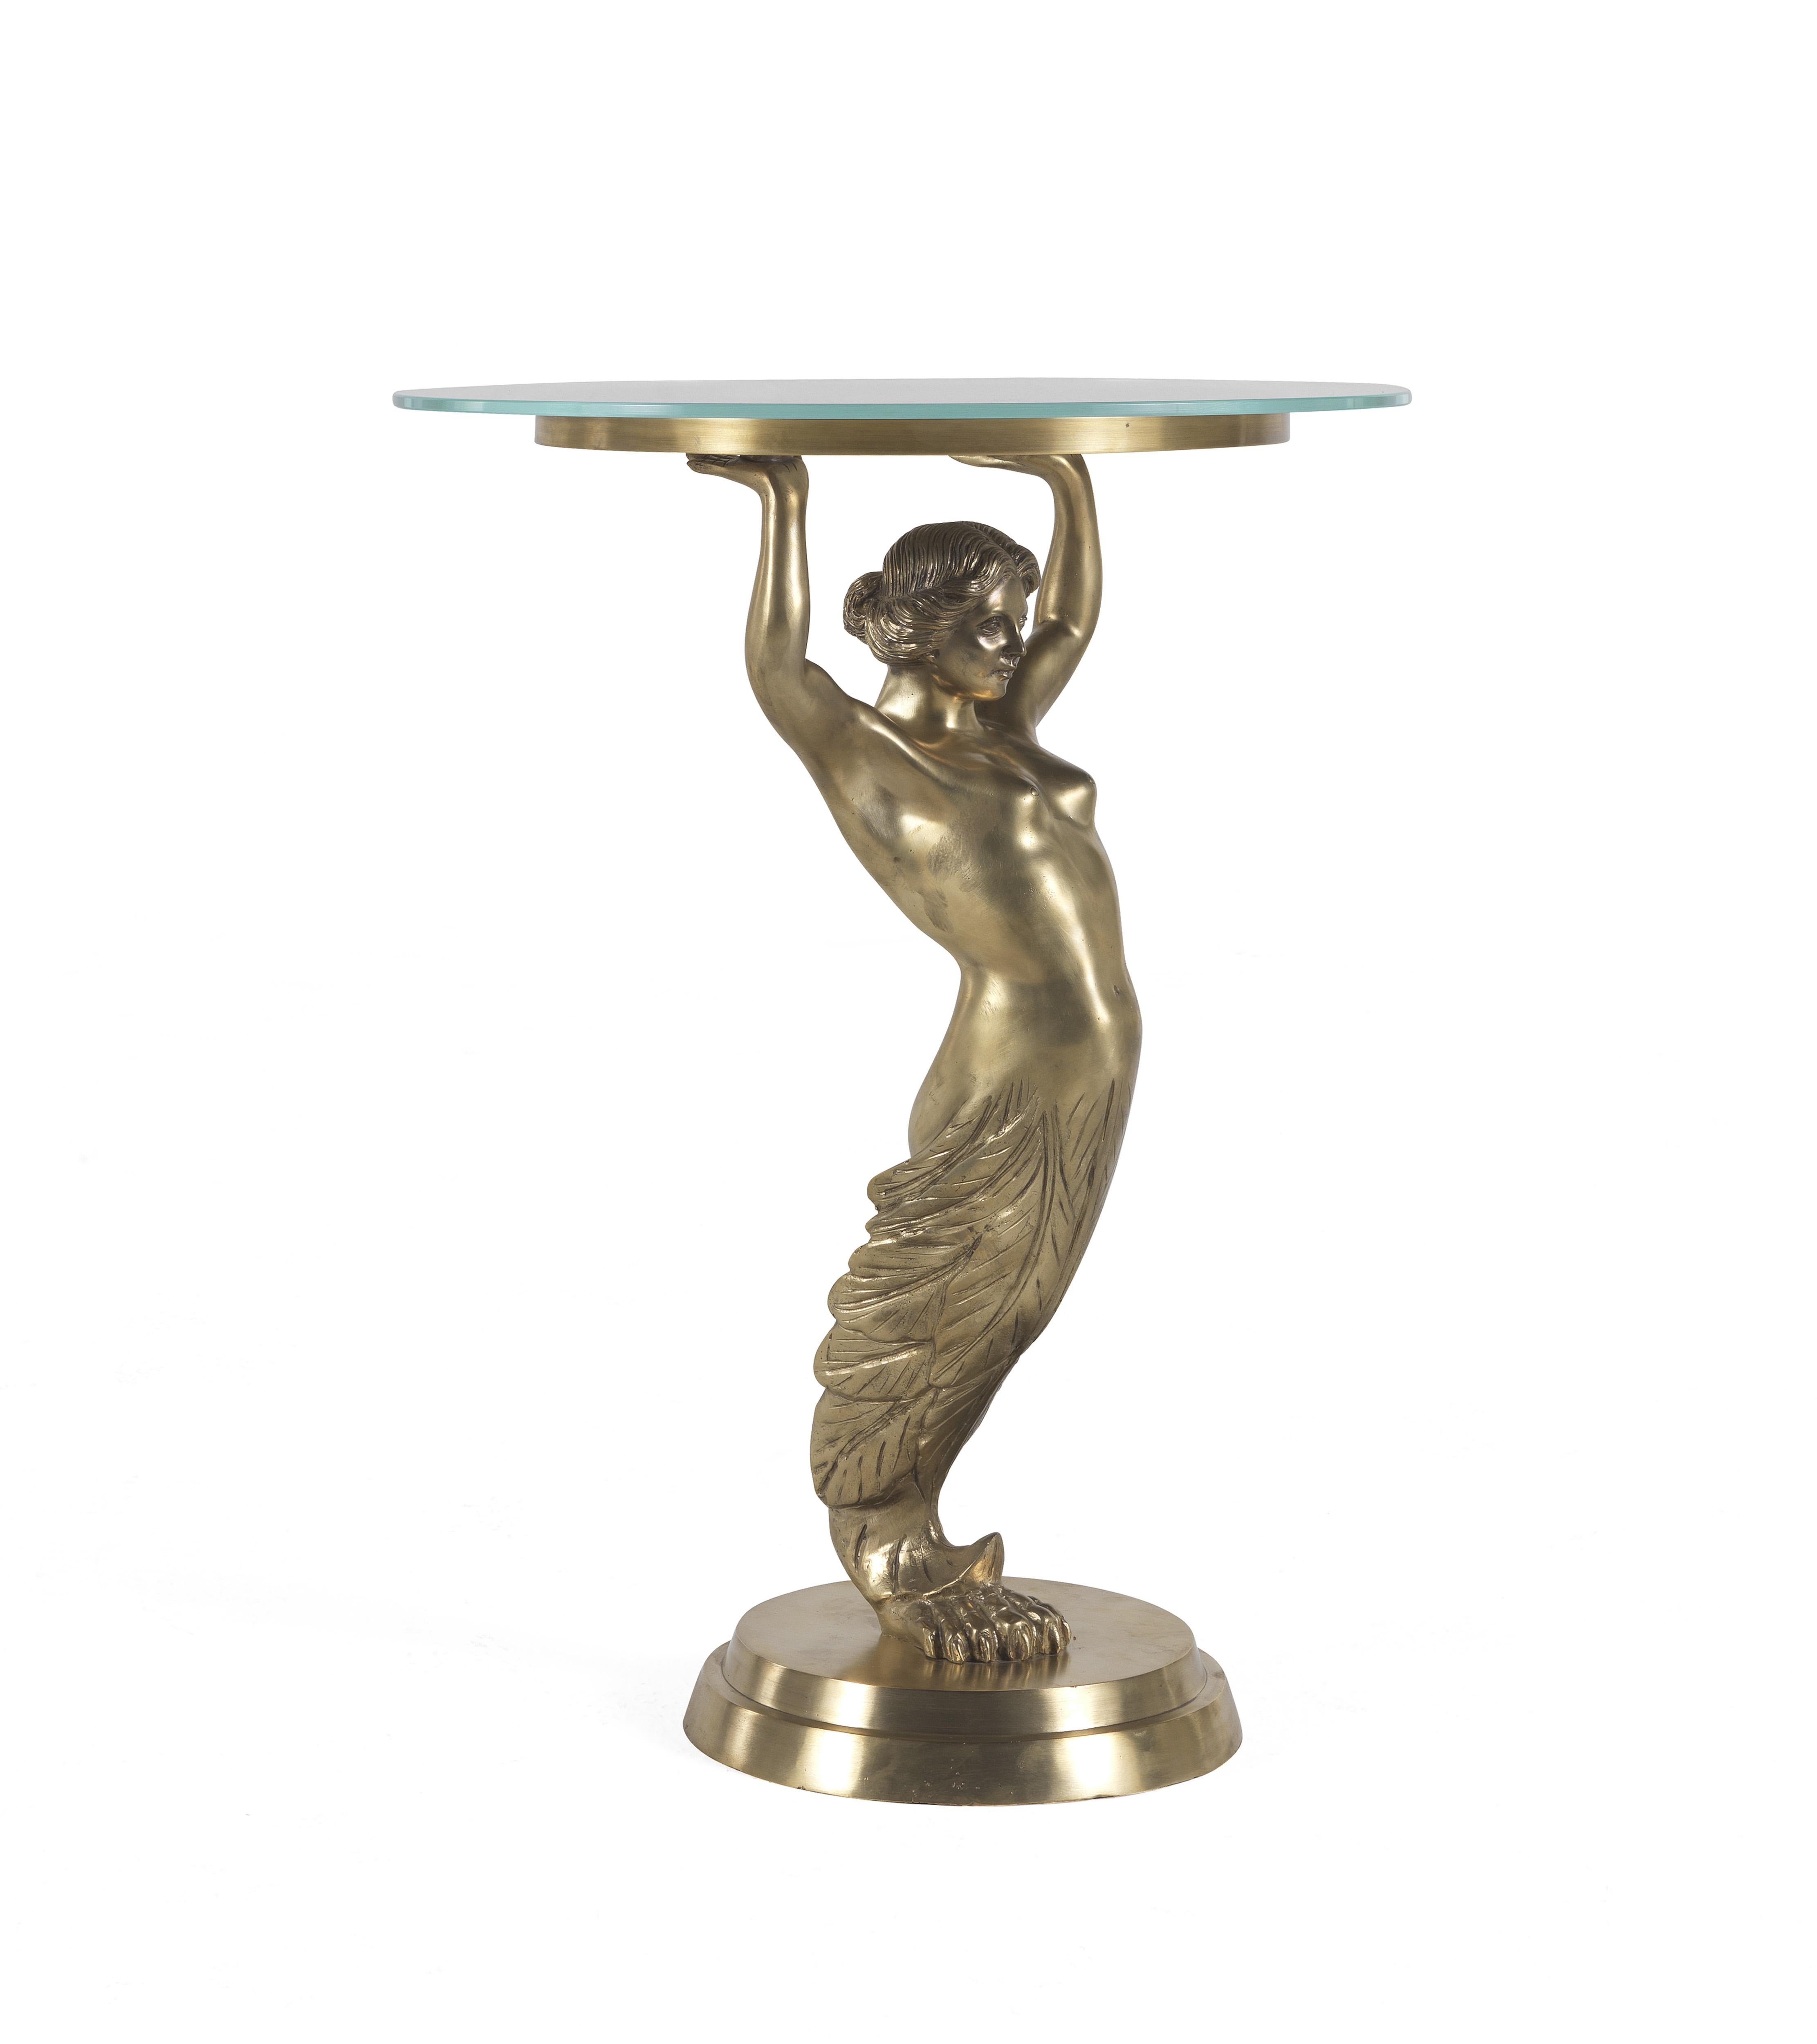 A sculptural small table of mythological and naturalistic inspiration, with a statues in brass casting representing the legendary character 